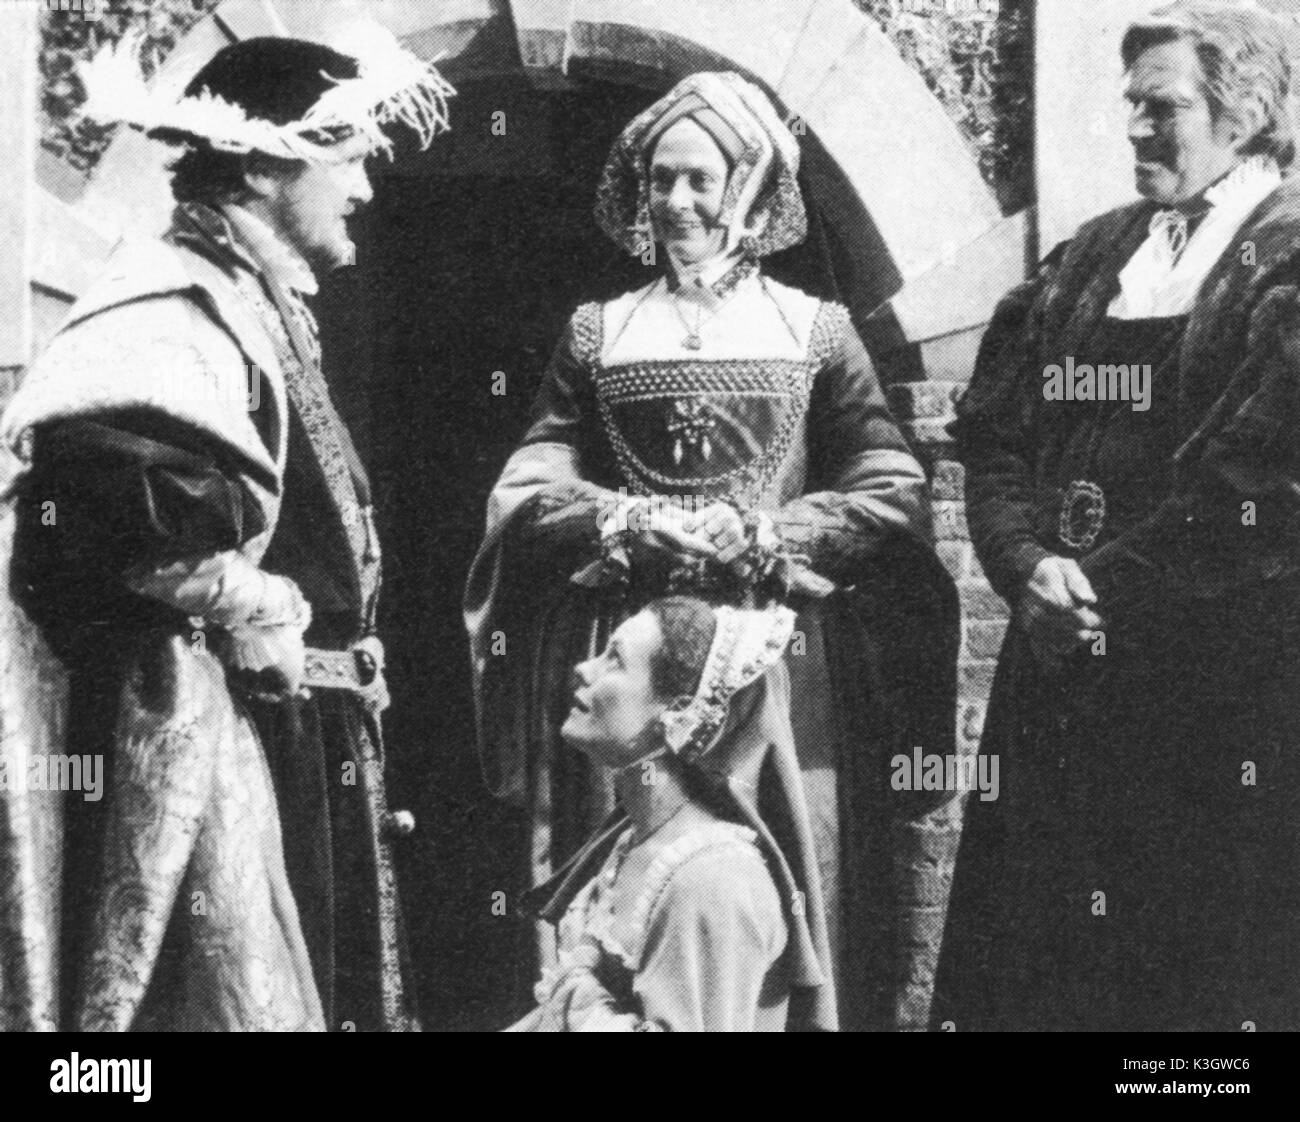 A MAN FOR ALL SEASONS MARK CHAMBERLAIN, ADRIENNE THOMAS, VANESSA REDGRAVE , CHARLTON HESTON as Sir Thomas More on location at Dourney Court A MAN FOR ALL SEASONS from left - MARK CHAMBERLAIN, ADRIENNE THOMAS, VANESSA REDGRAVE [behind], and CHARLTON HESTON as Sir Thomas More, on location at Dourney Court Made at Pinewood with US money [Turner Network Television] and directed by Charlton Heston, produced by his son Fraser Heston Stock Photo